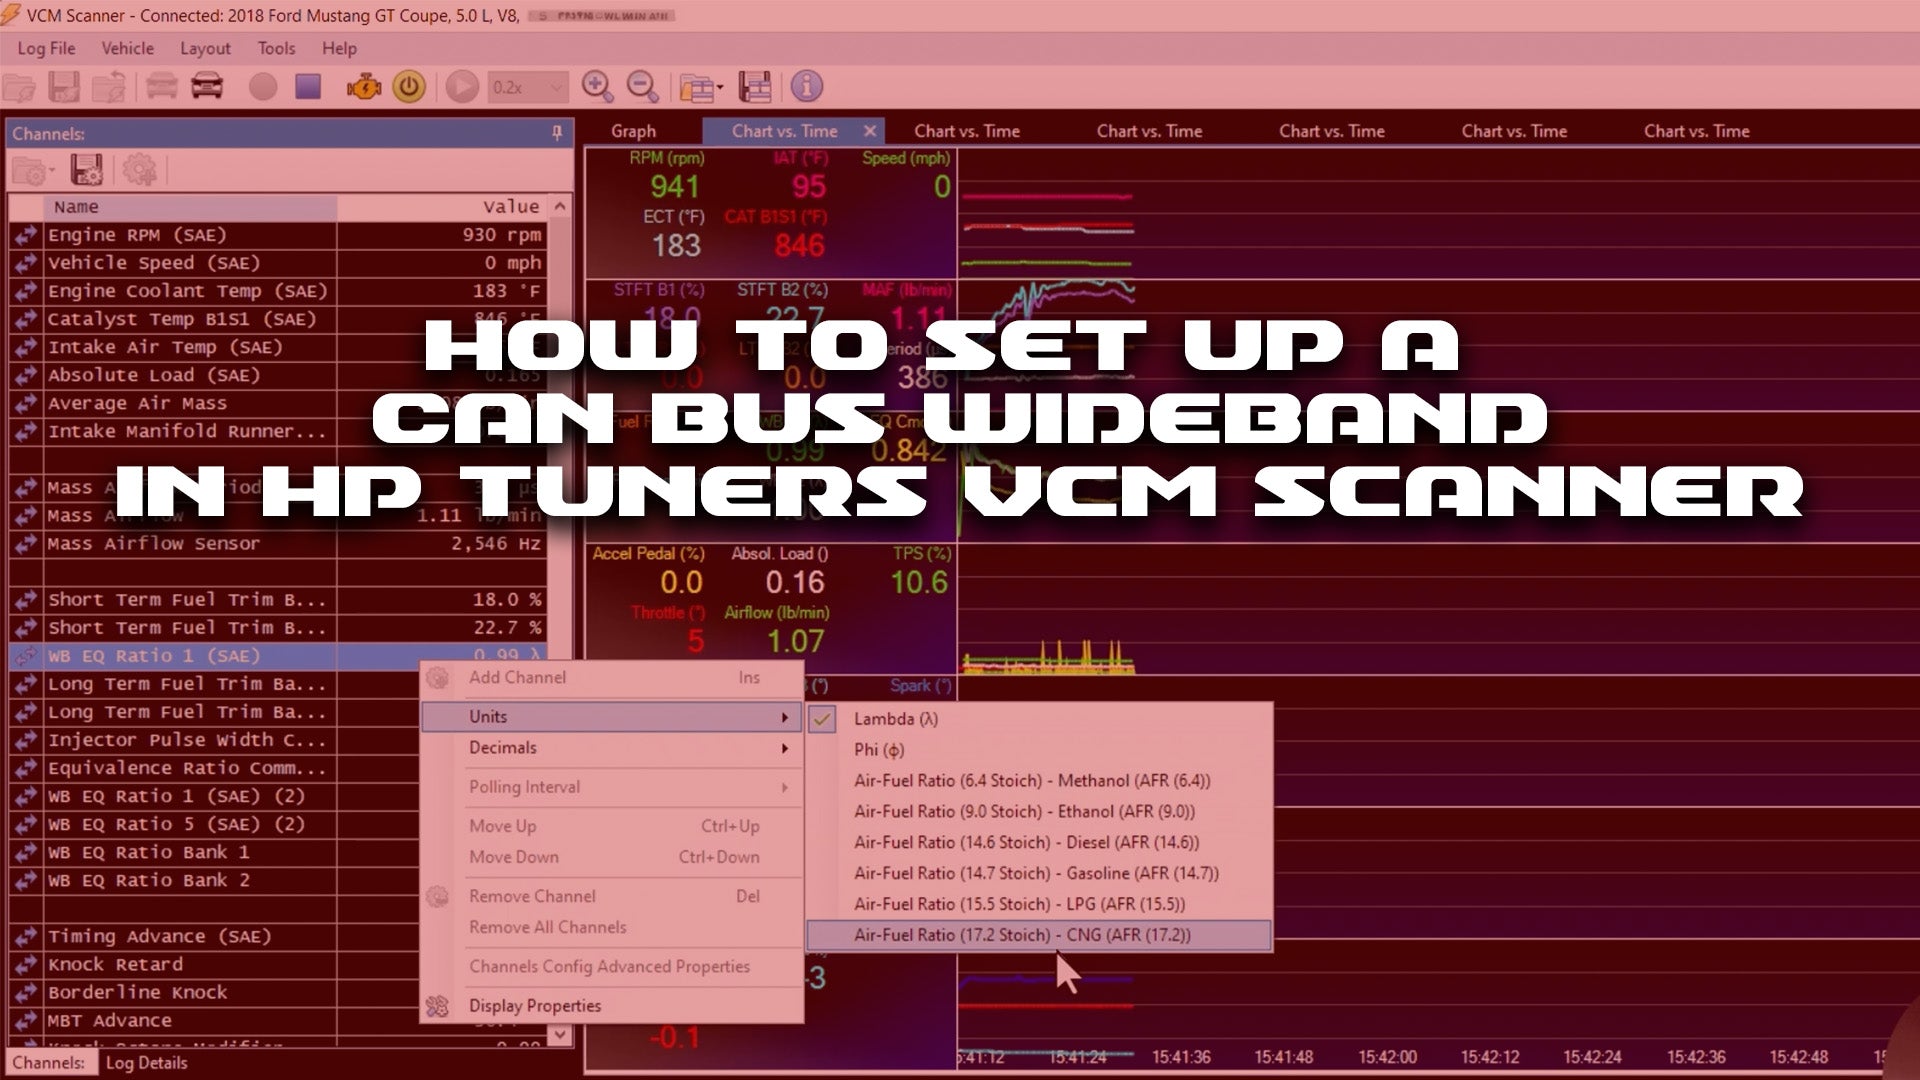 How to Set Up a CAN bus Wideband in HP Tuners VCM Scanner